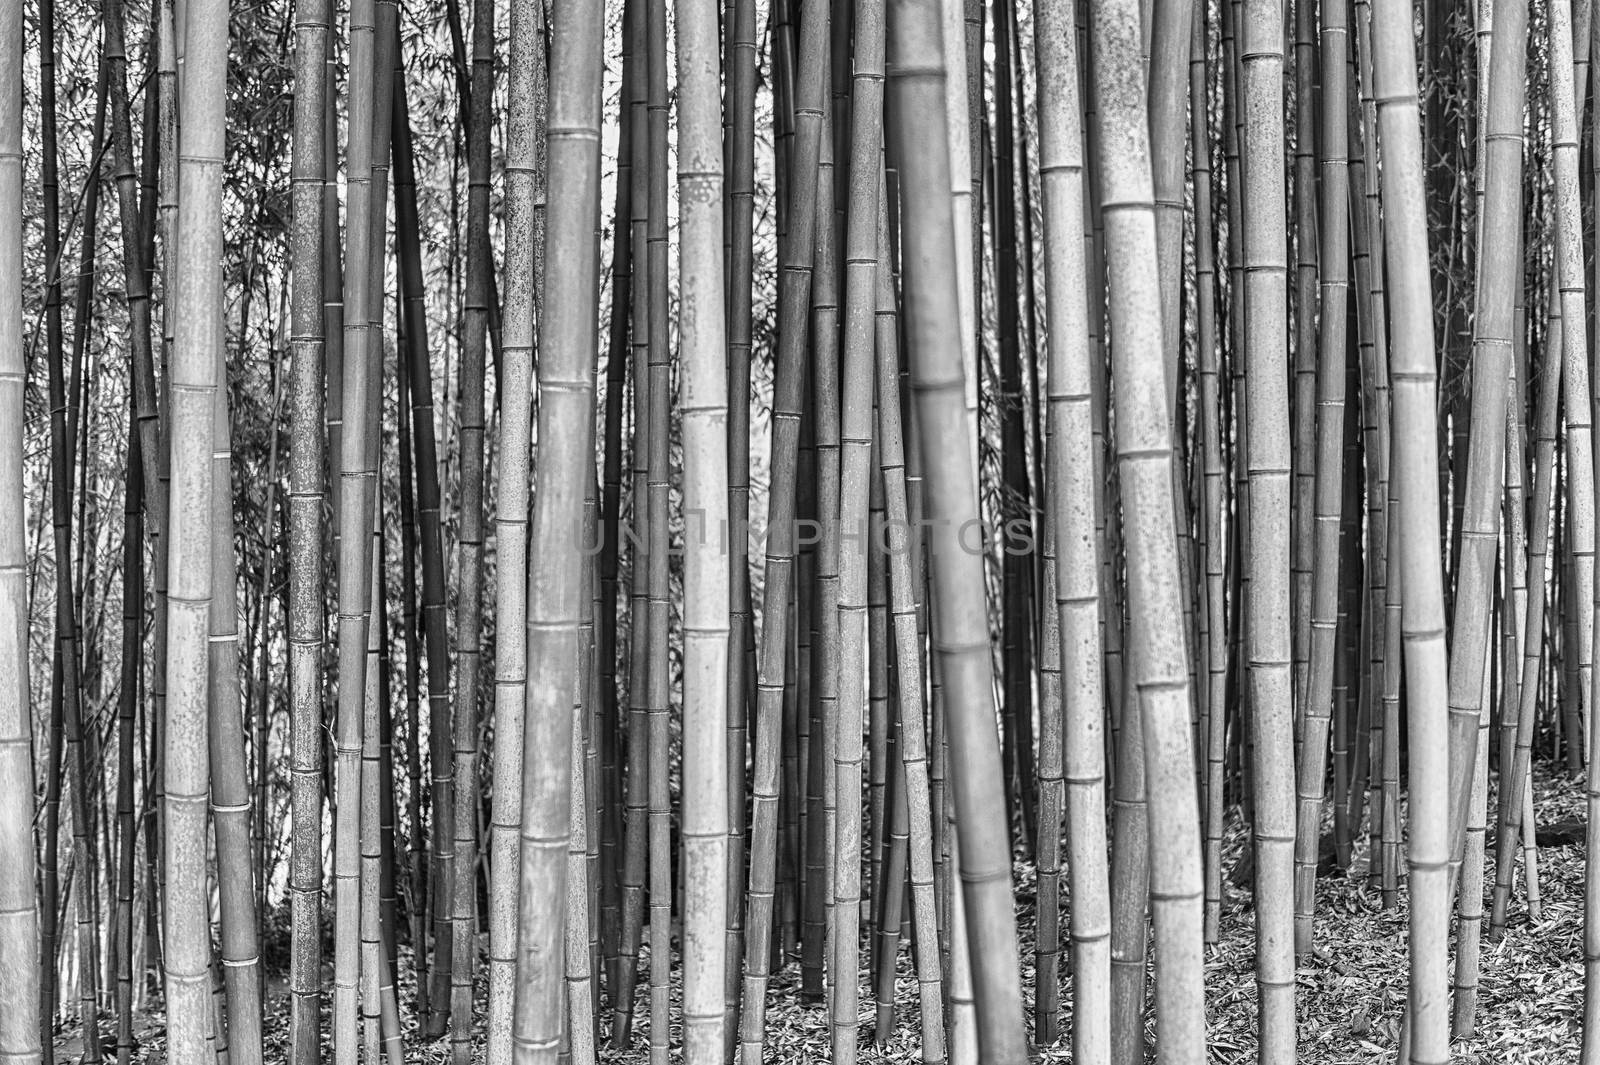 Background with foliage pattern of bamboo trees in a grove or forest